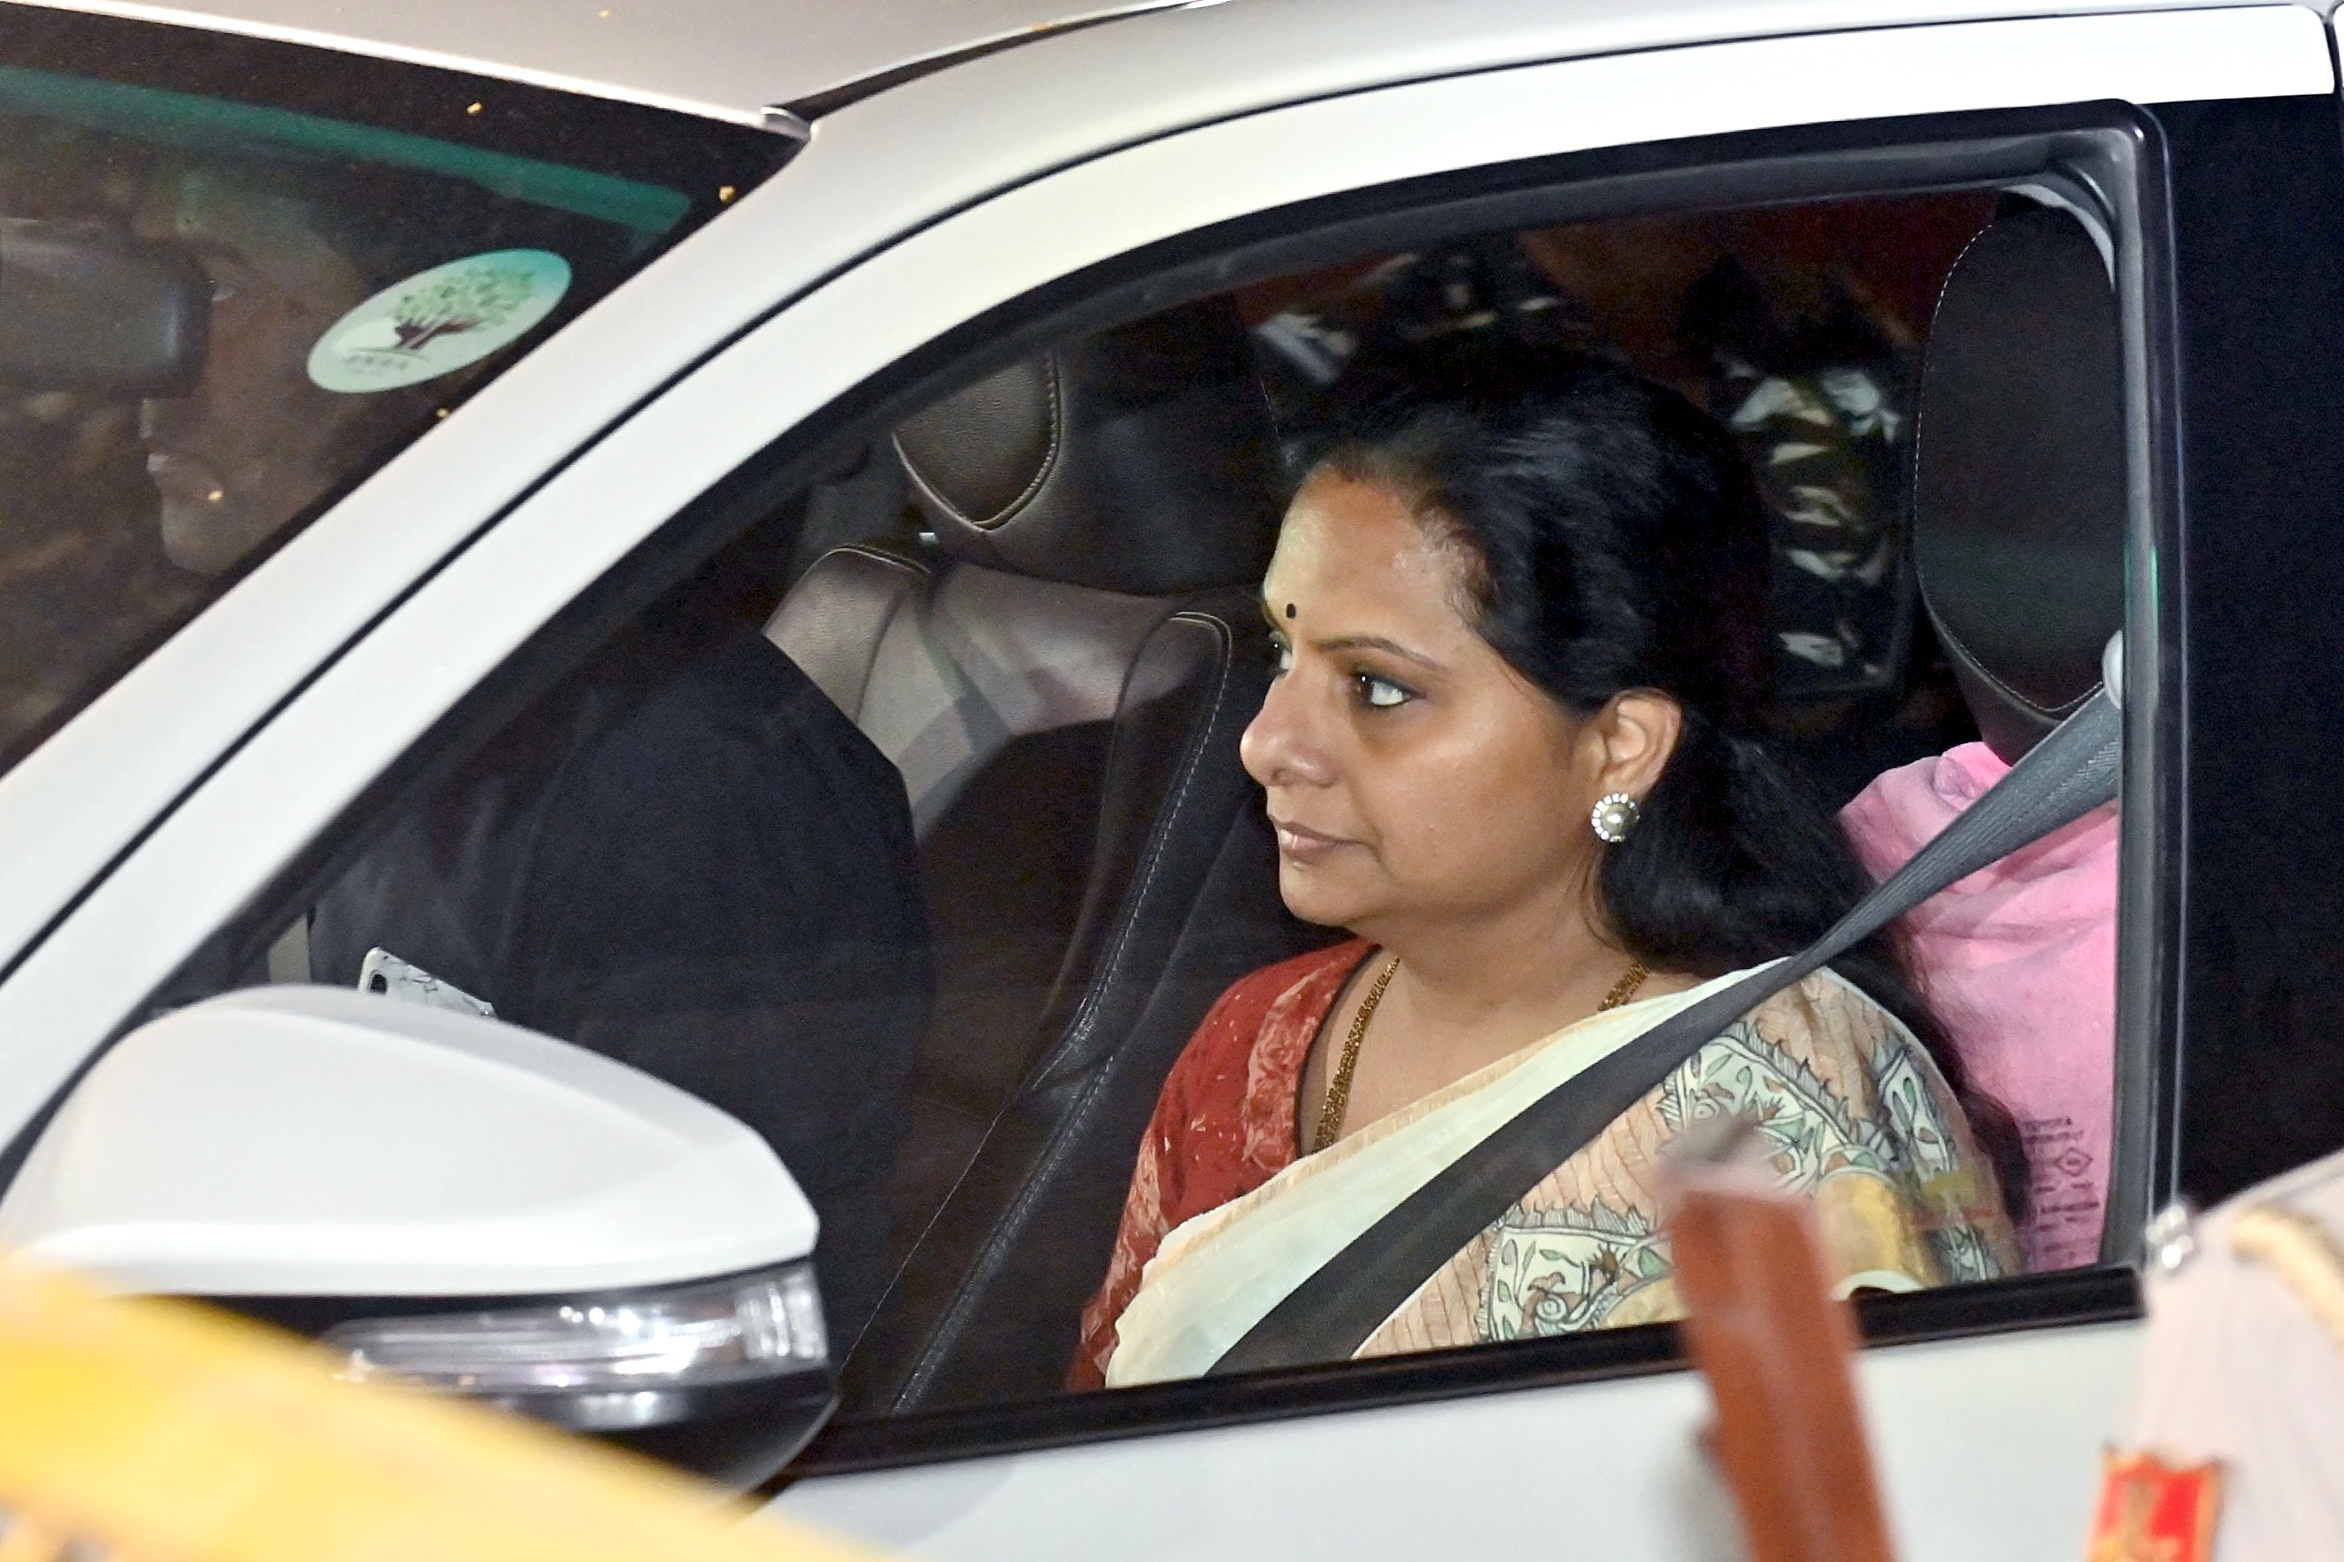 Delhi liquor policy case: BRS MLC K Kavitha arrives at ED office for questioning